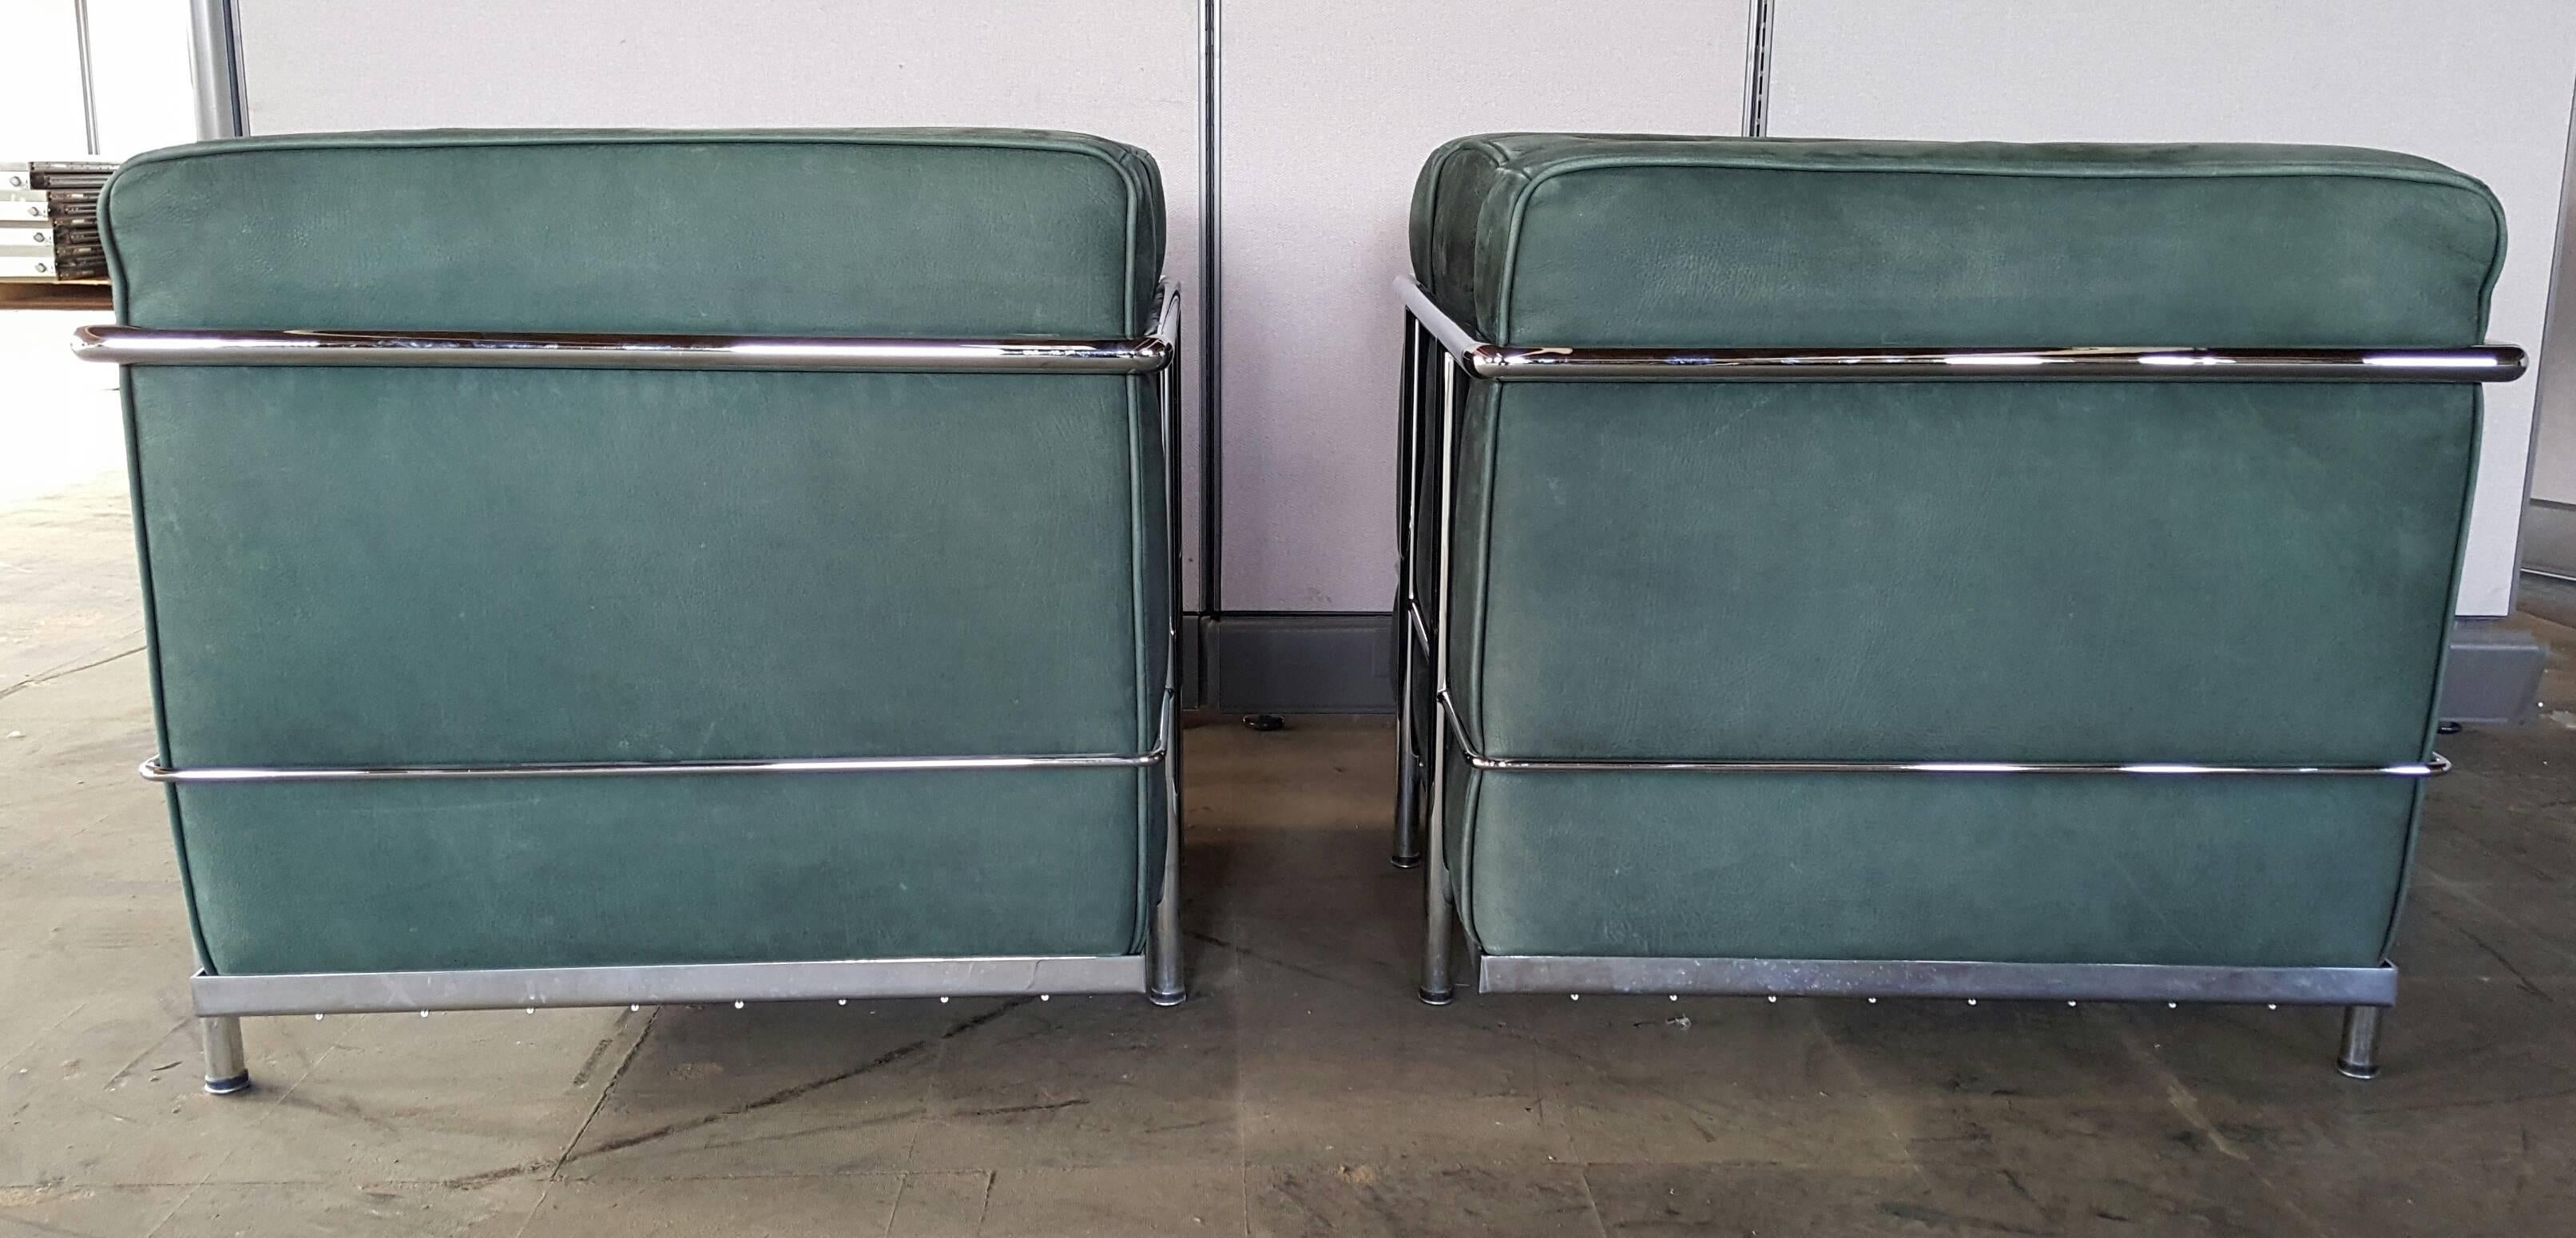 Pair of Le Corbusier Lc2 Lounge Chairs, Green Suede and Chrome 1